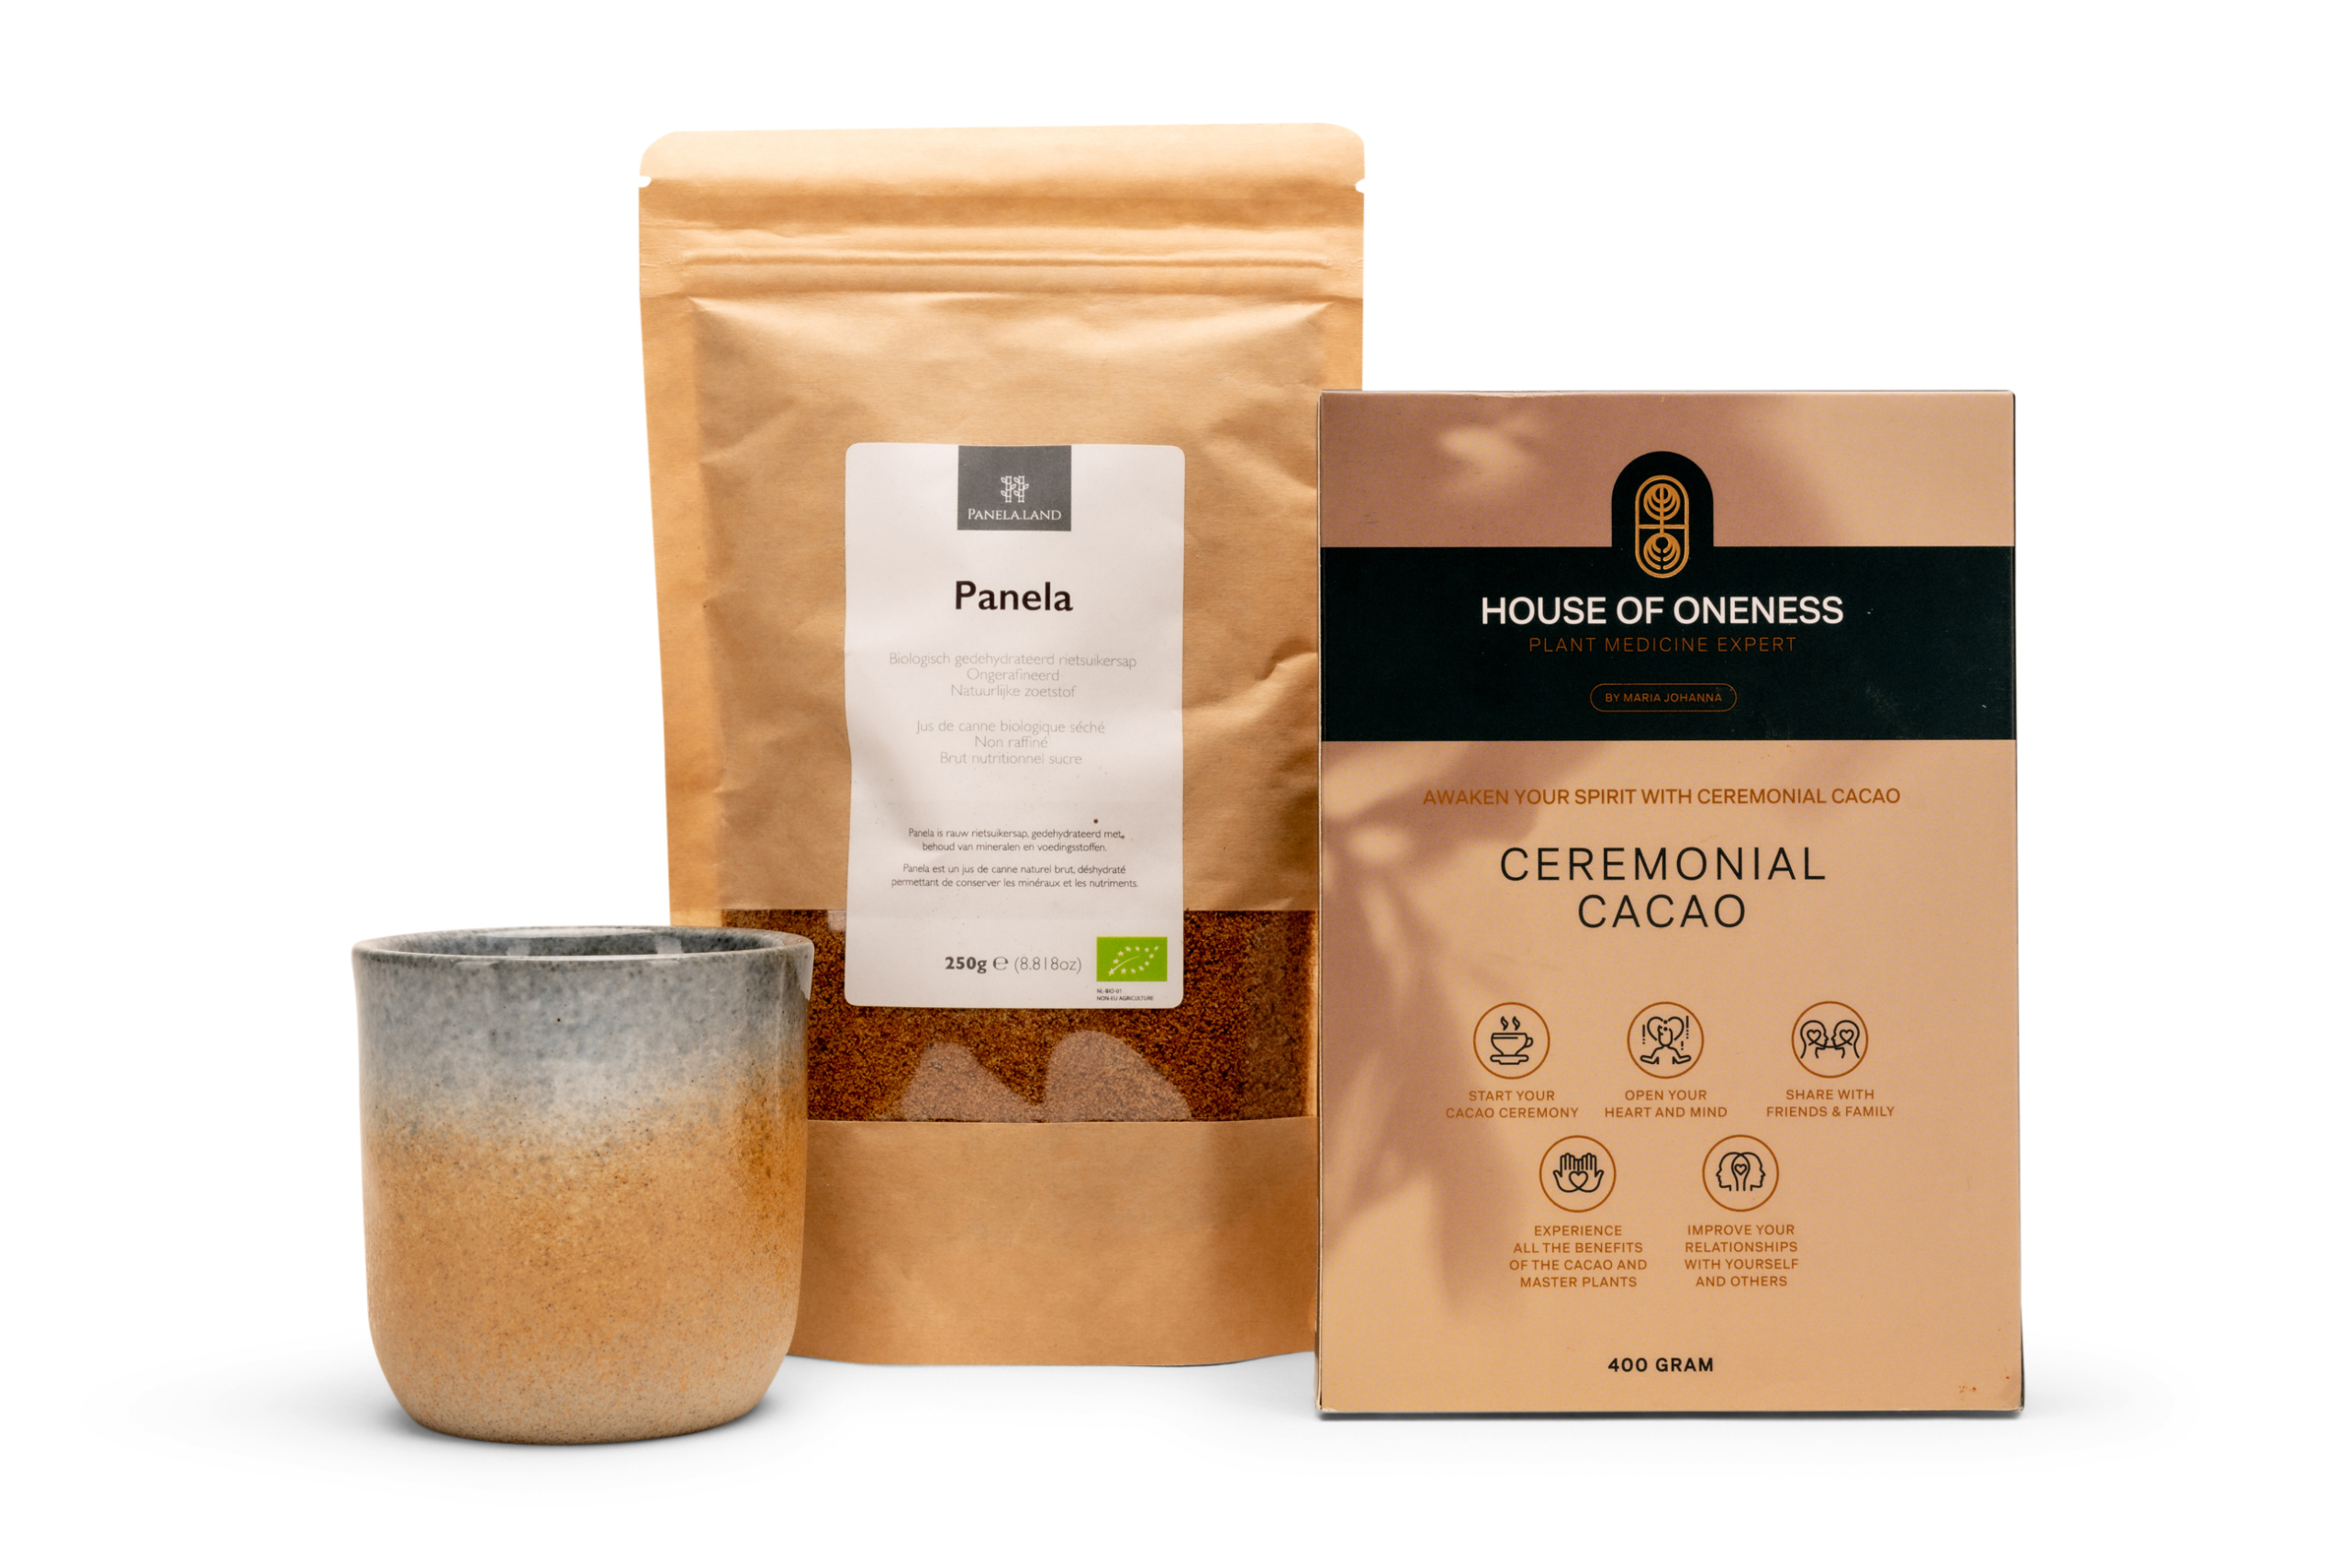 ceremonial-cacao-the-best-quality-colombia-criollo-bean-House-of-Oneness-panela-cup-maria-johanna